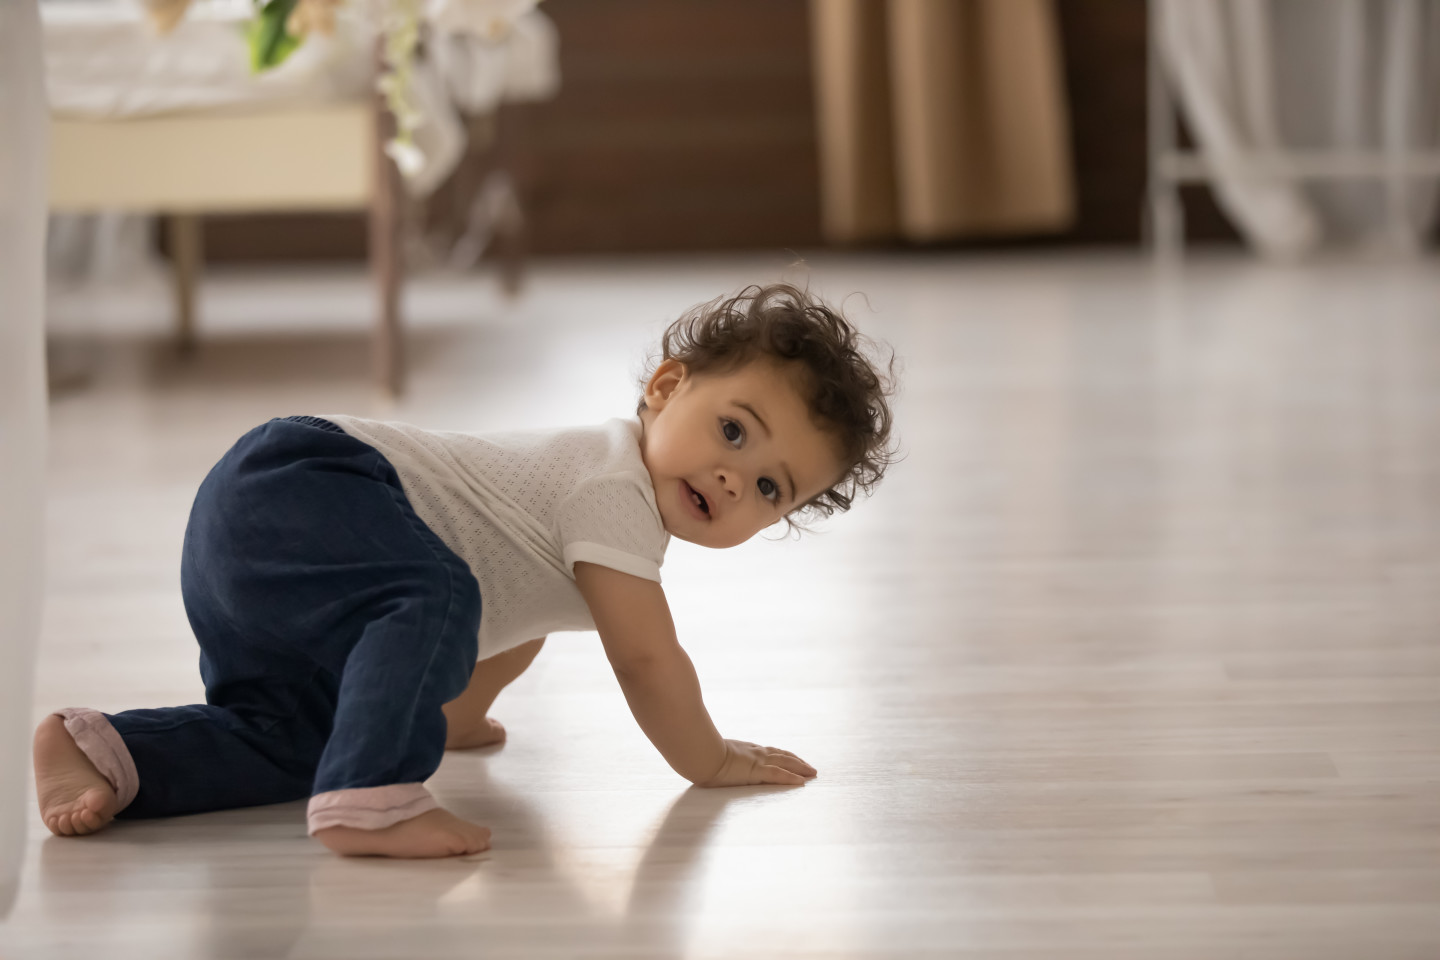 A baby doing a crab crawl on the floor.